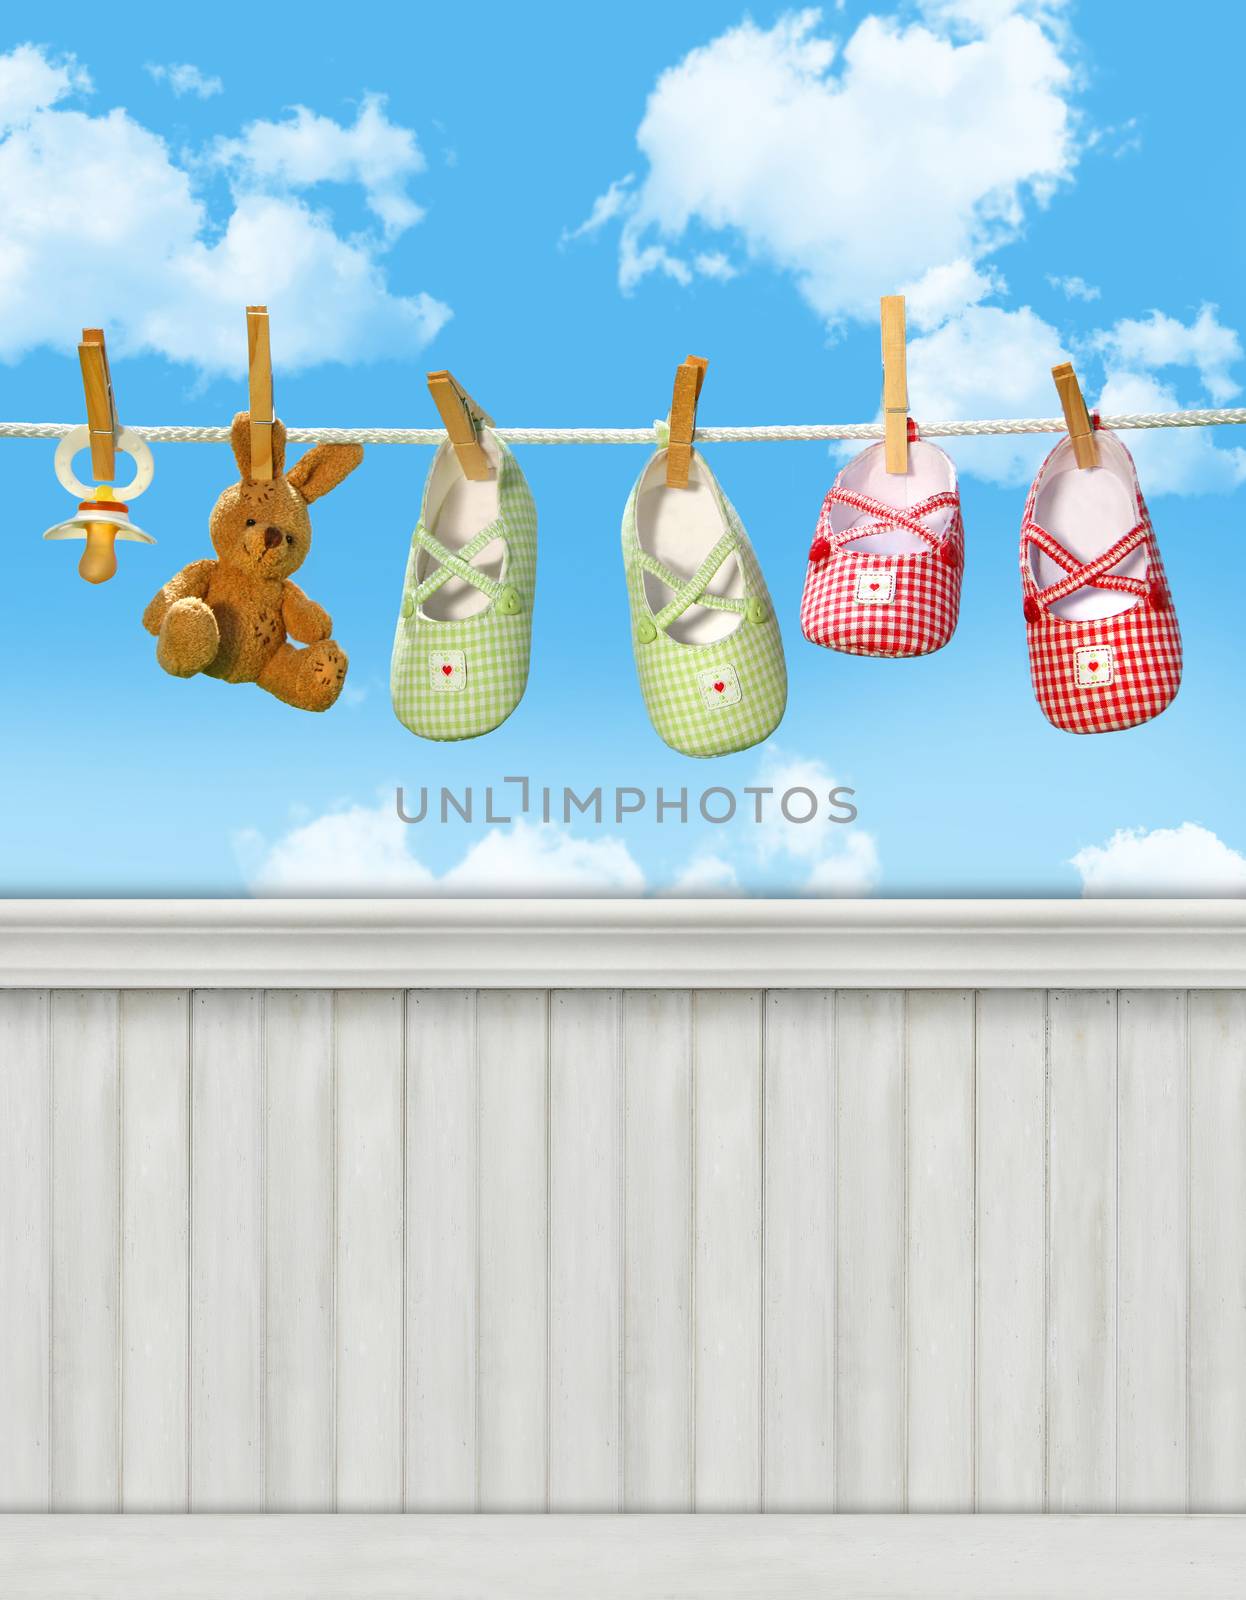 Summer wall background/backdrop by Sandralise